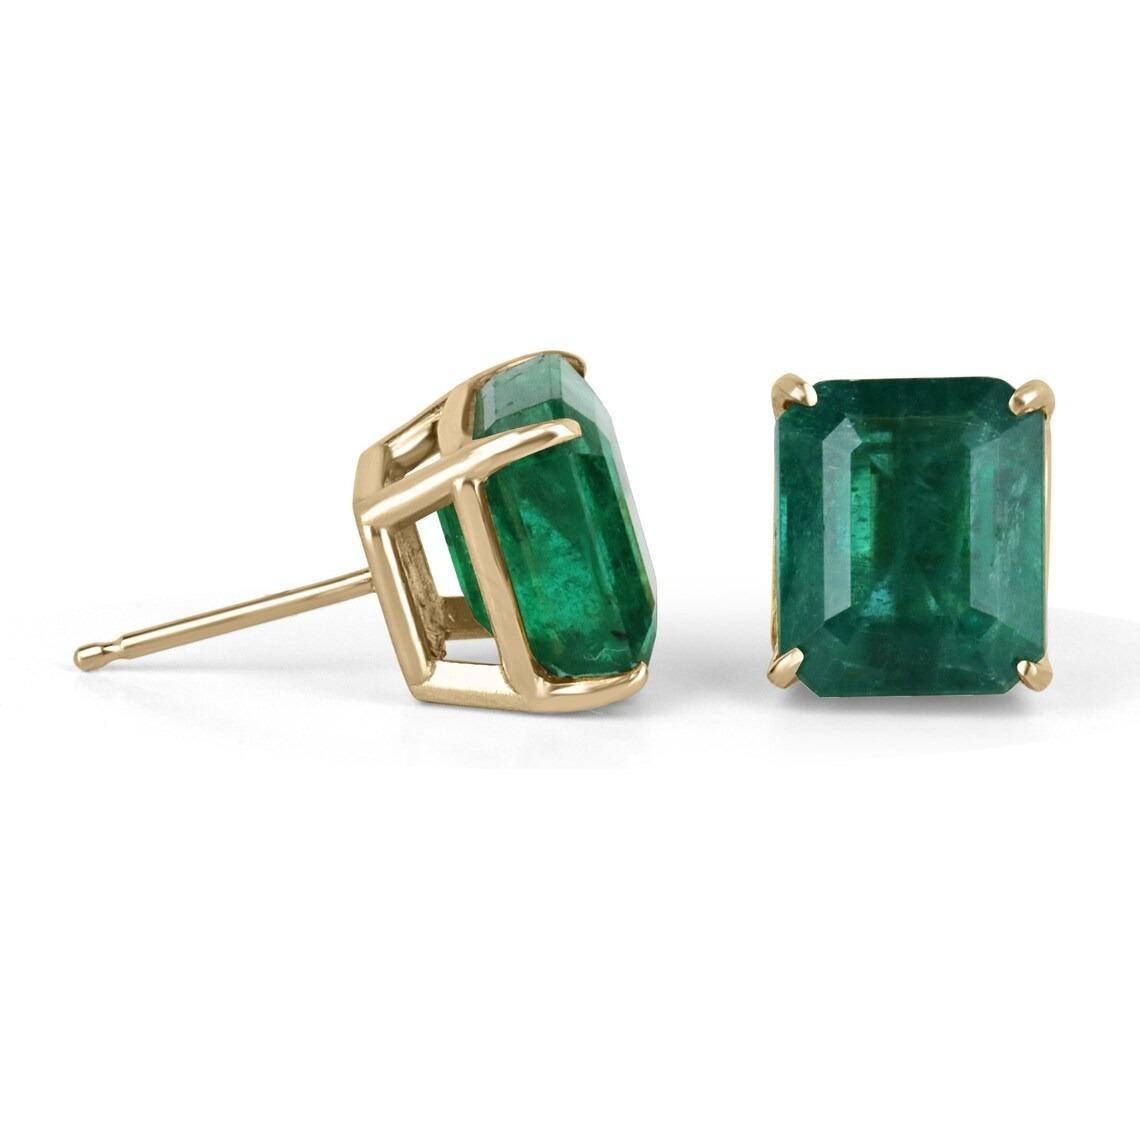 These natural emerald cut emerald stud earrings are a true statement piece. The emeralds are of exceptional quality, with a total weight of 6.63 carats and a dark, rich green color that exudes luxury and sophistication. The emeralds are expertly cut